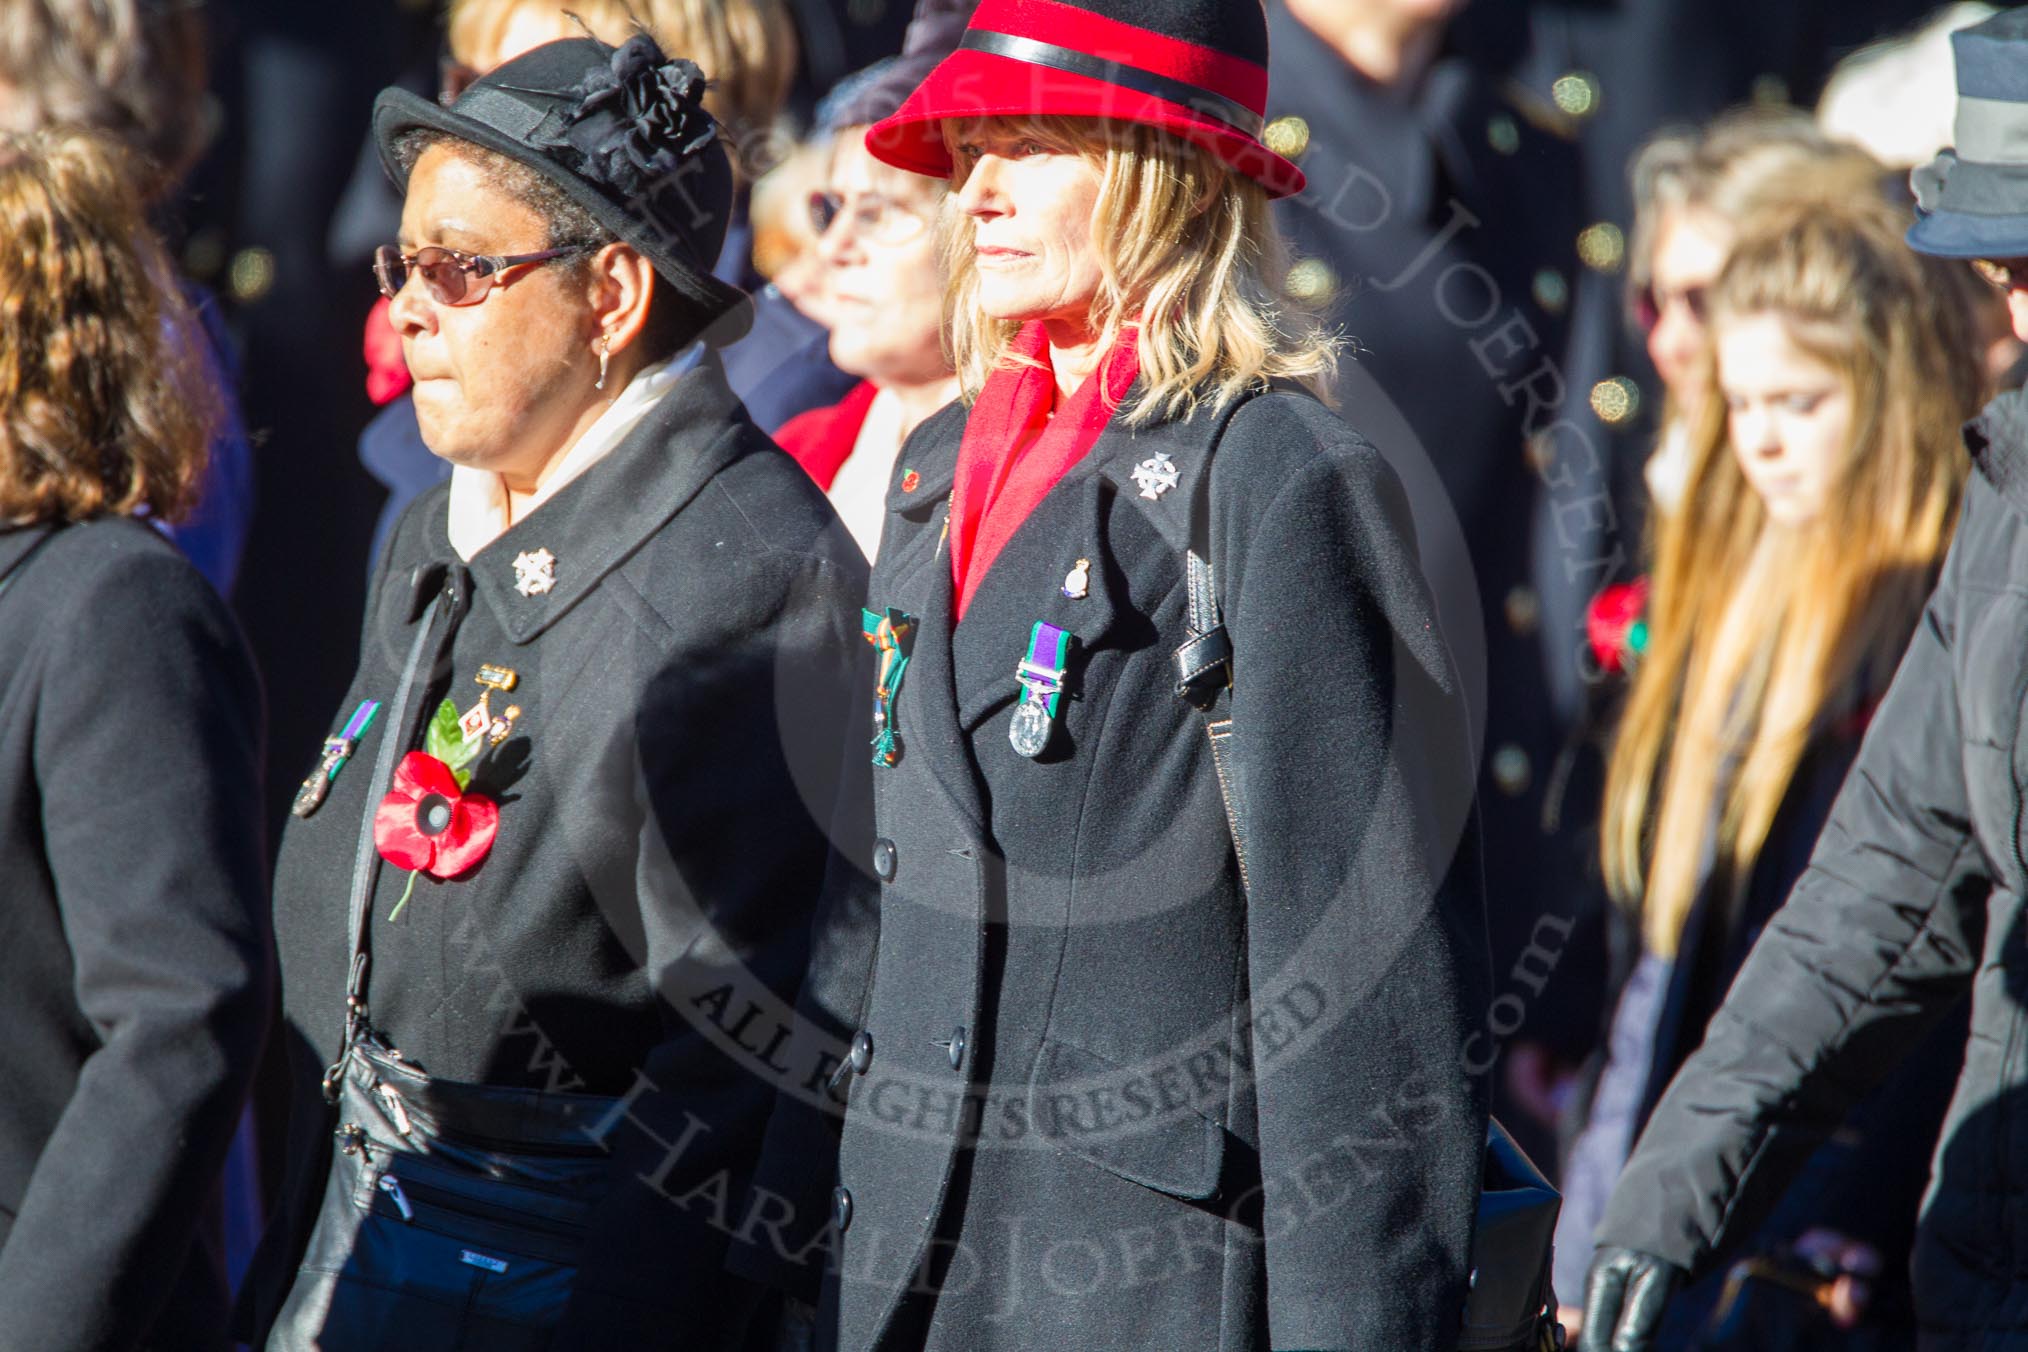 Remembrance Sunday Cenotaph March Past 2013: D1 - War Widows Association. The lady in the red and black hat is Mary Moreland, committee member and WWA Public Relations Officer, a Northern Ireland Widow that also served as a Greenfinch with the Ulster Defence Regiment. The lady standing on Mary's right is Elaine Duggan..
Press stand opposite the Foreign Office building, Whitehall, London SW1,
London,
Greater London,
United Kingdom,
on 10 November 2013 at 11:38, image #20